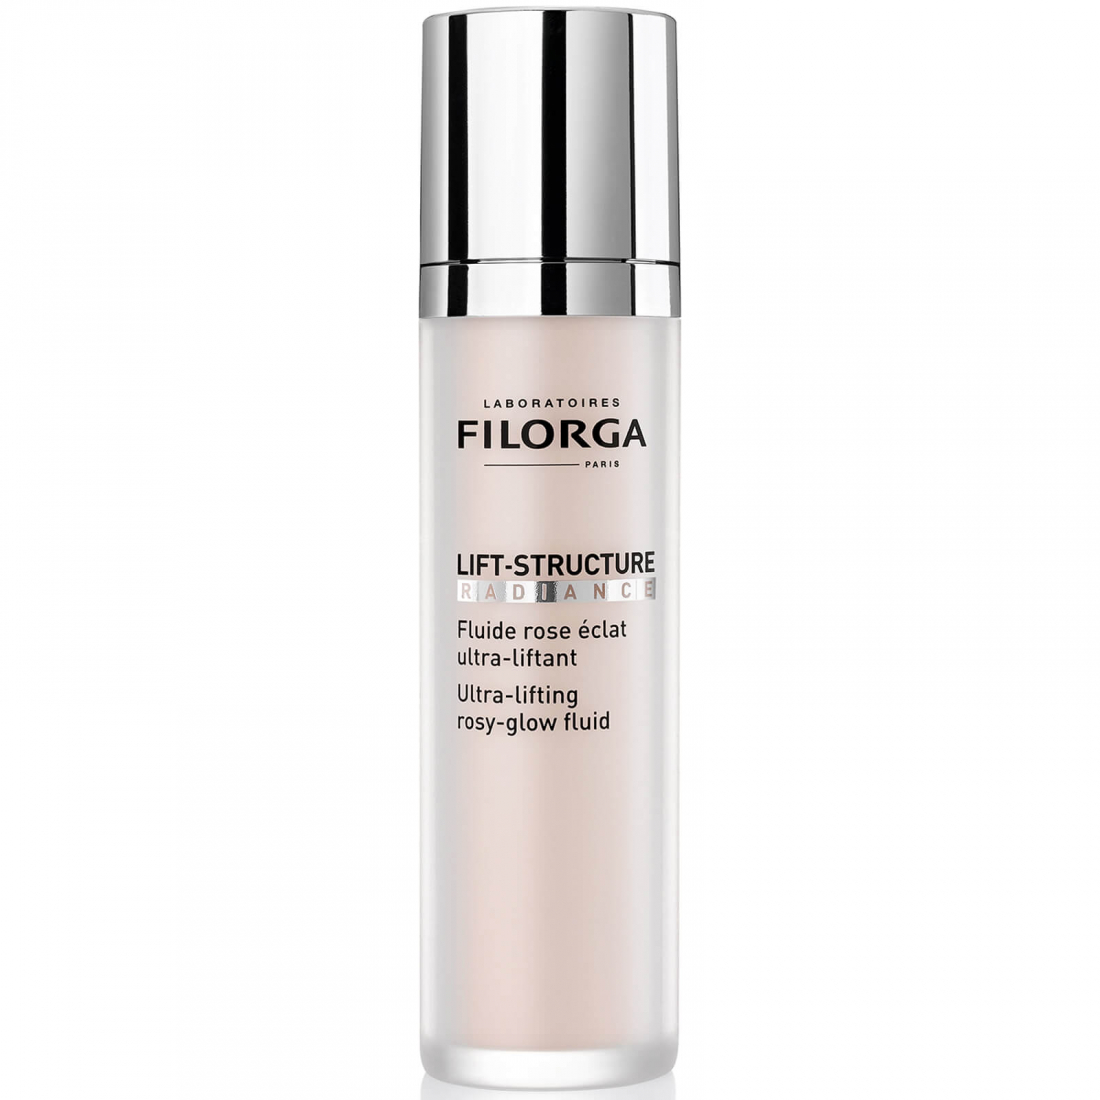 'Lift-Structure Radiance' Lifting Cream - 50 ml